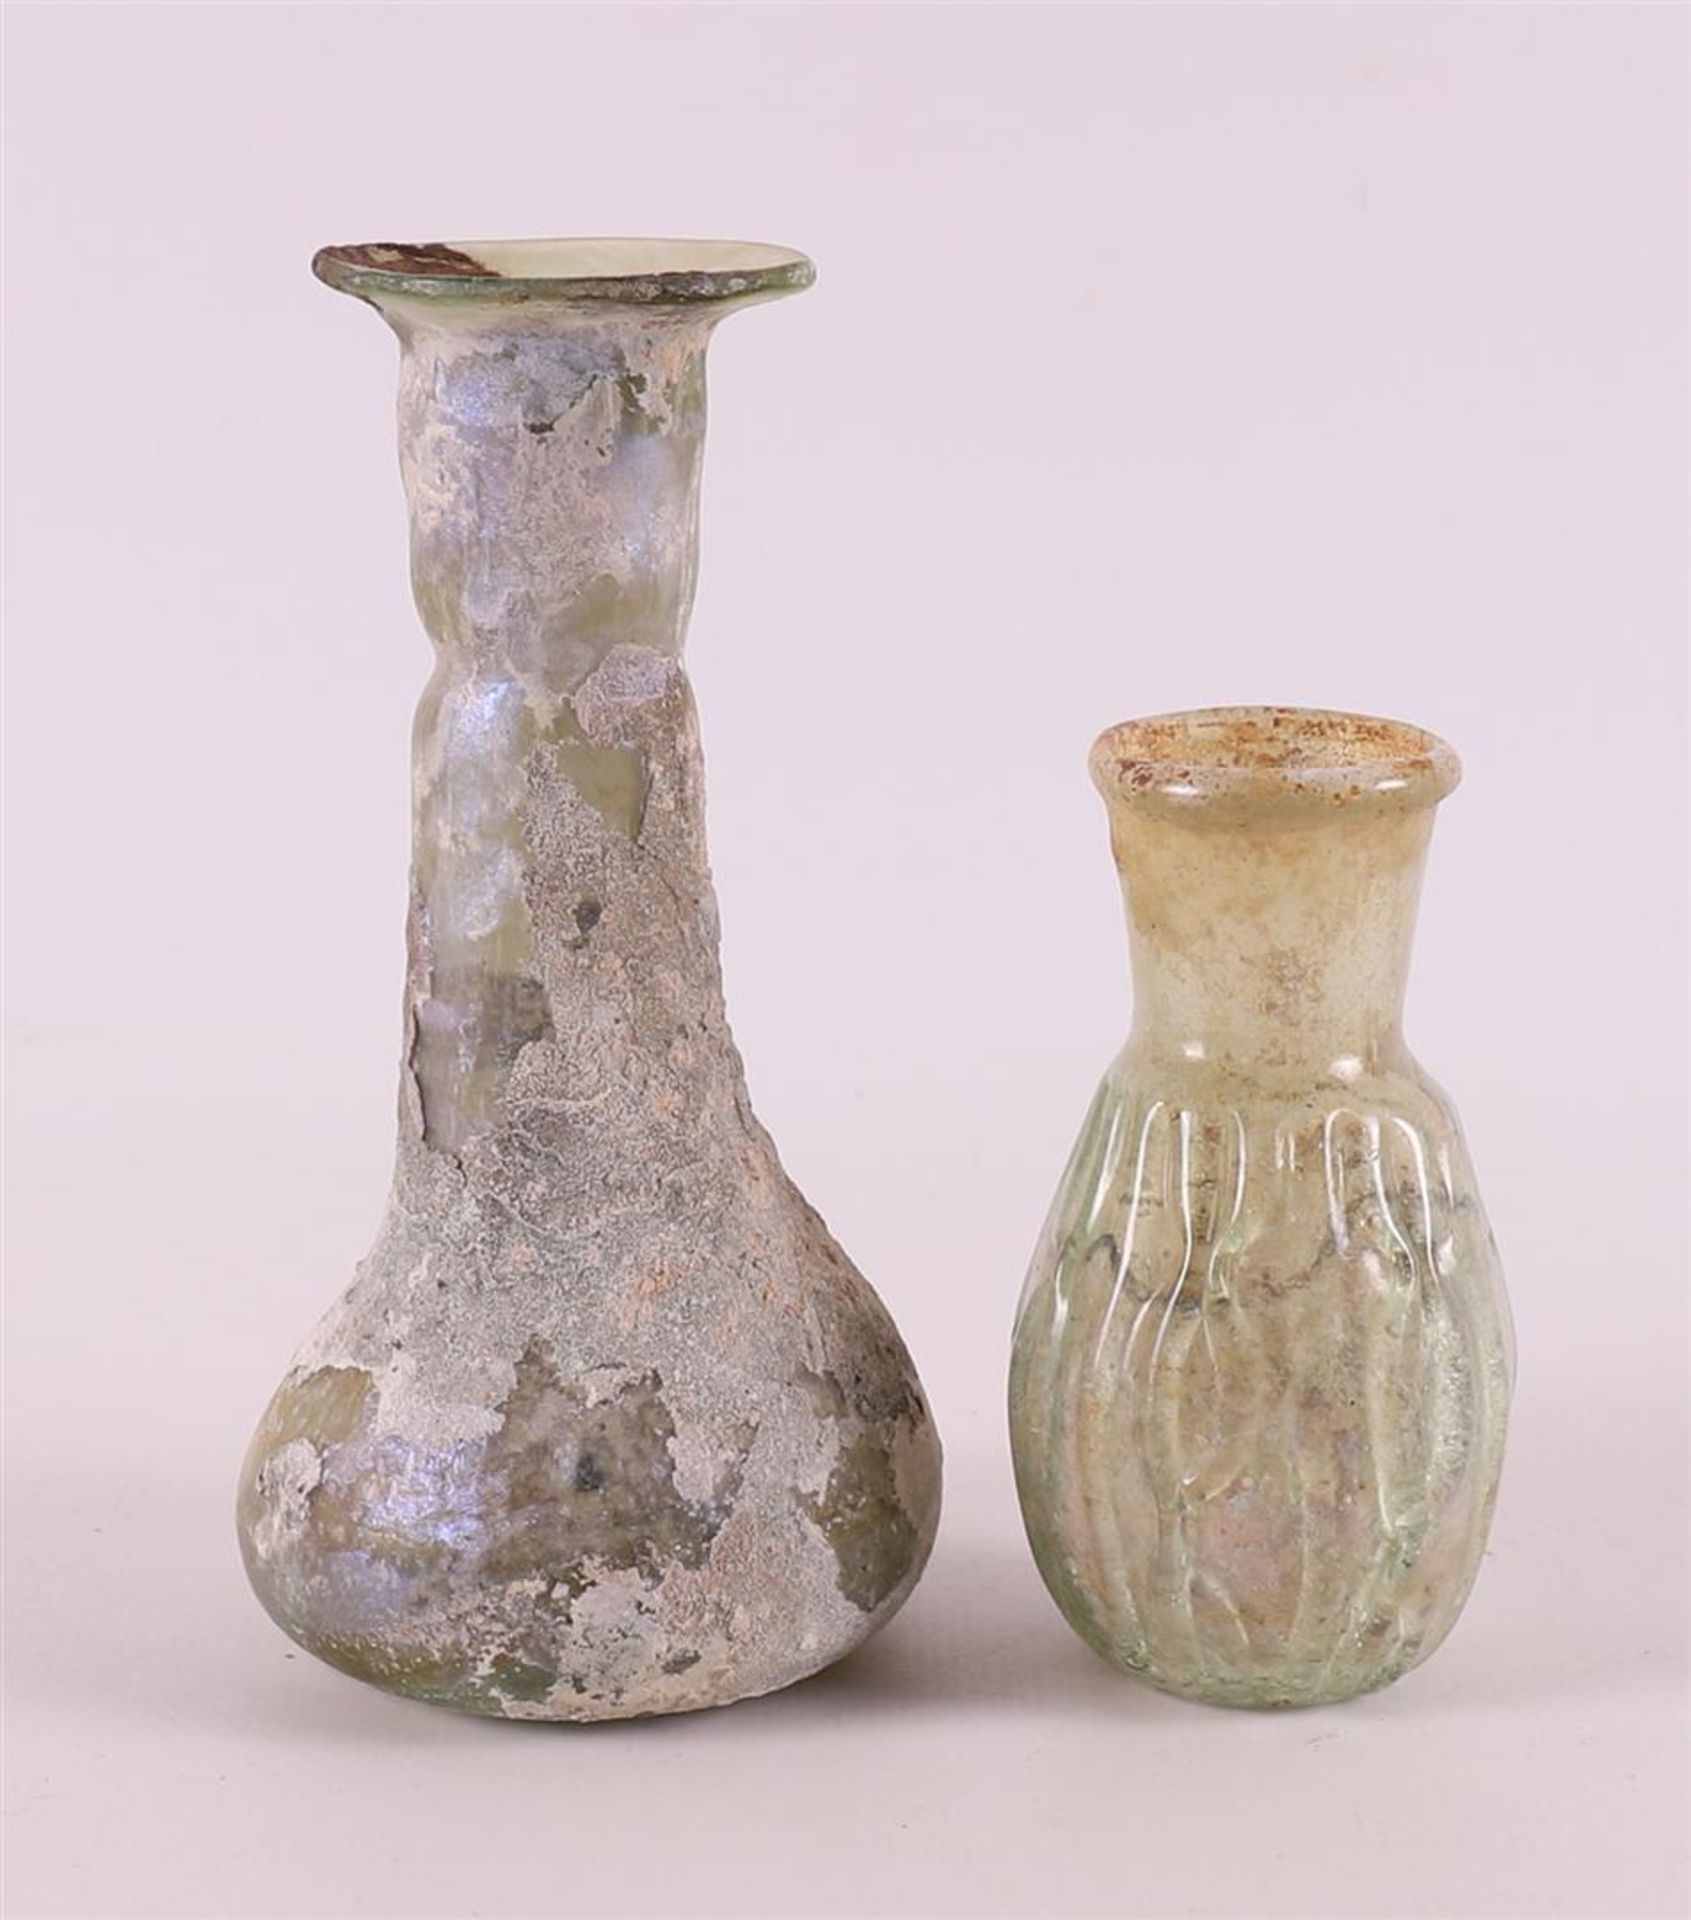 Two various Roman glass vases, 2nd - 4th century. - Image 4 of 6